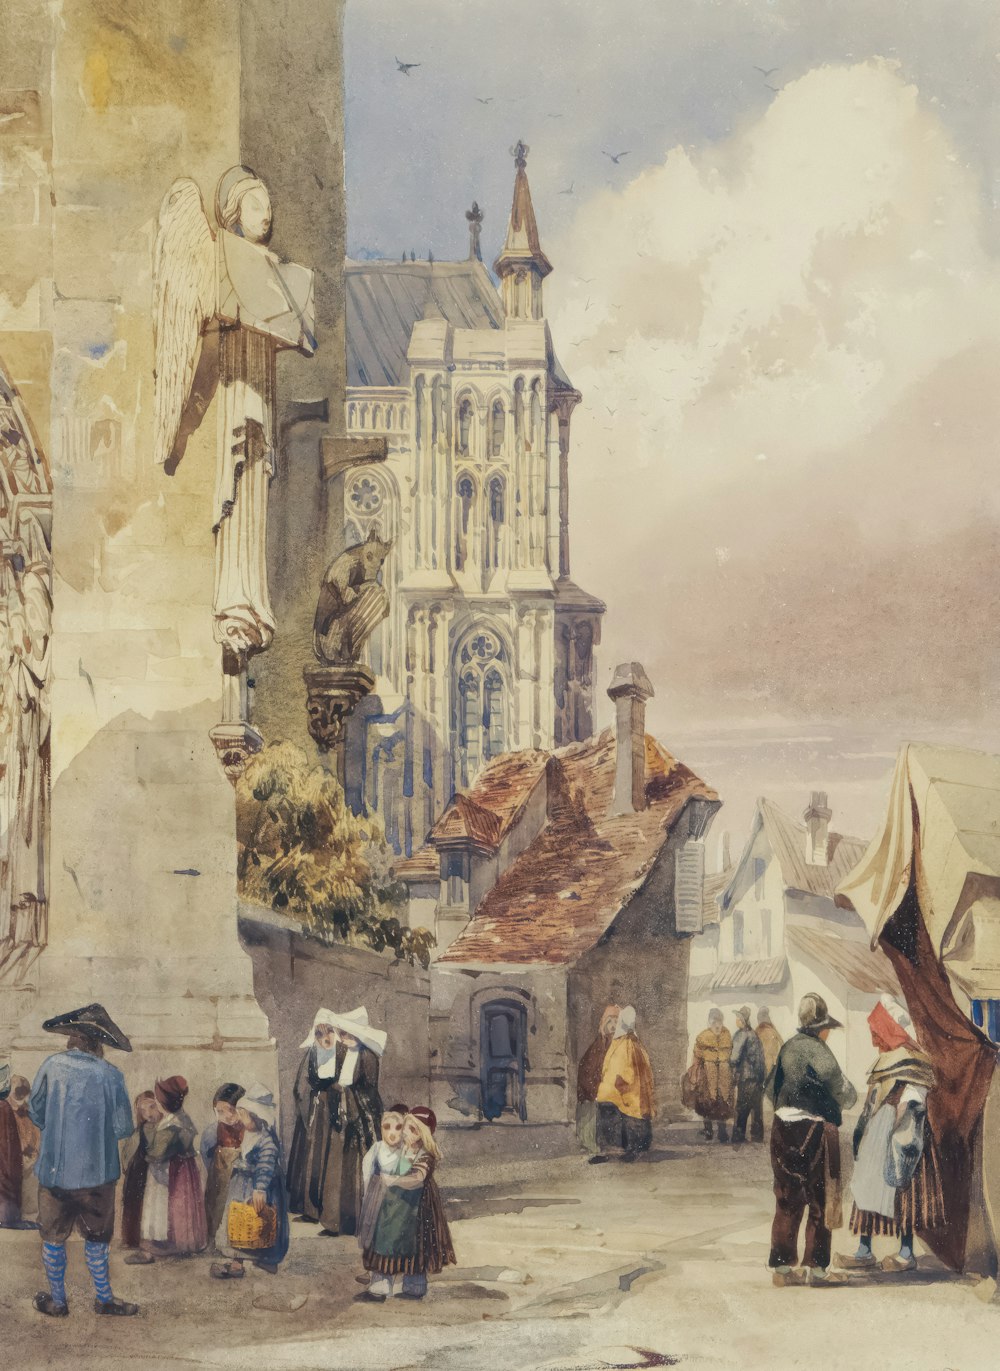 a painting of a group of people standing in front of a church